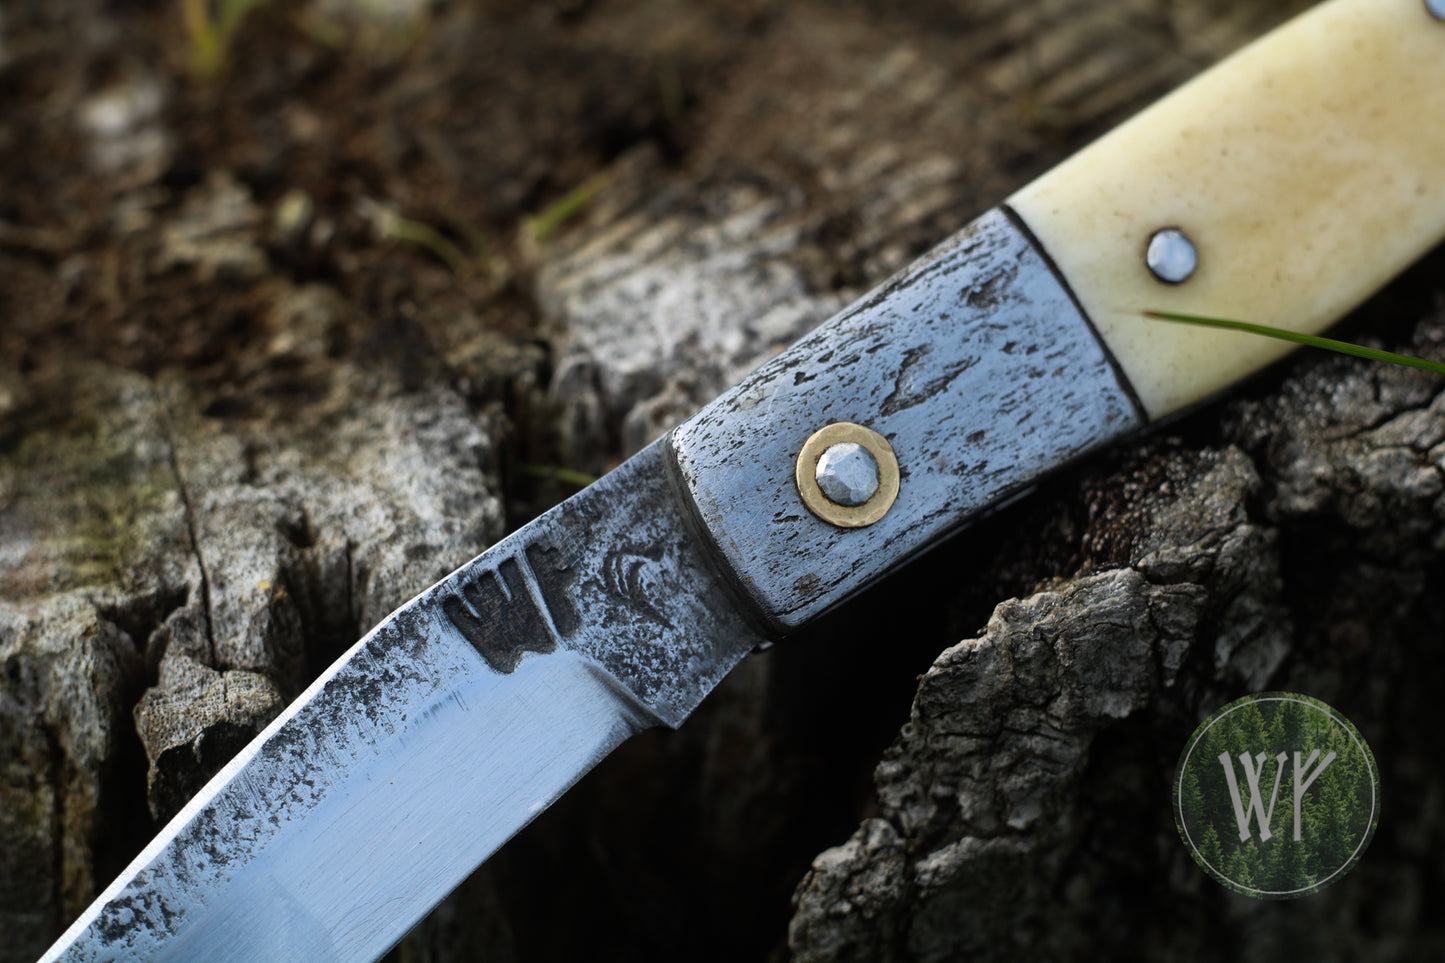 Hand-forged Slipjoint / UK Legal Folding Knife / 80CRV2 Blade with Buffalo Horn & Wrought Iron Handle